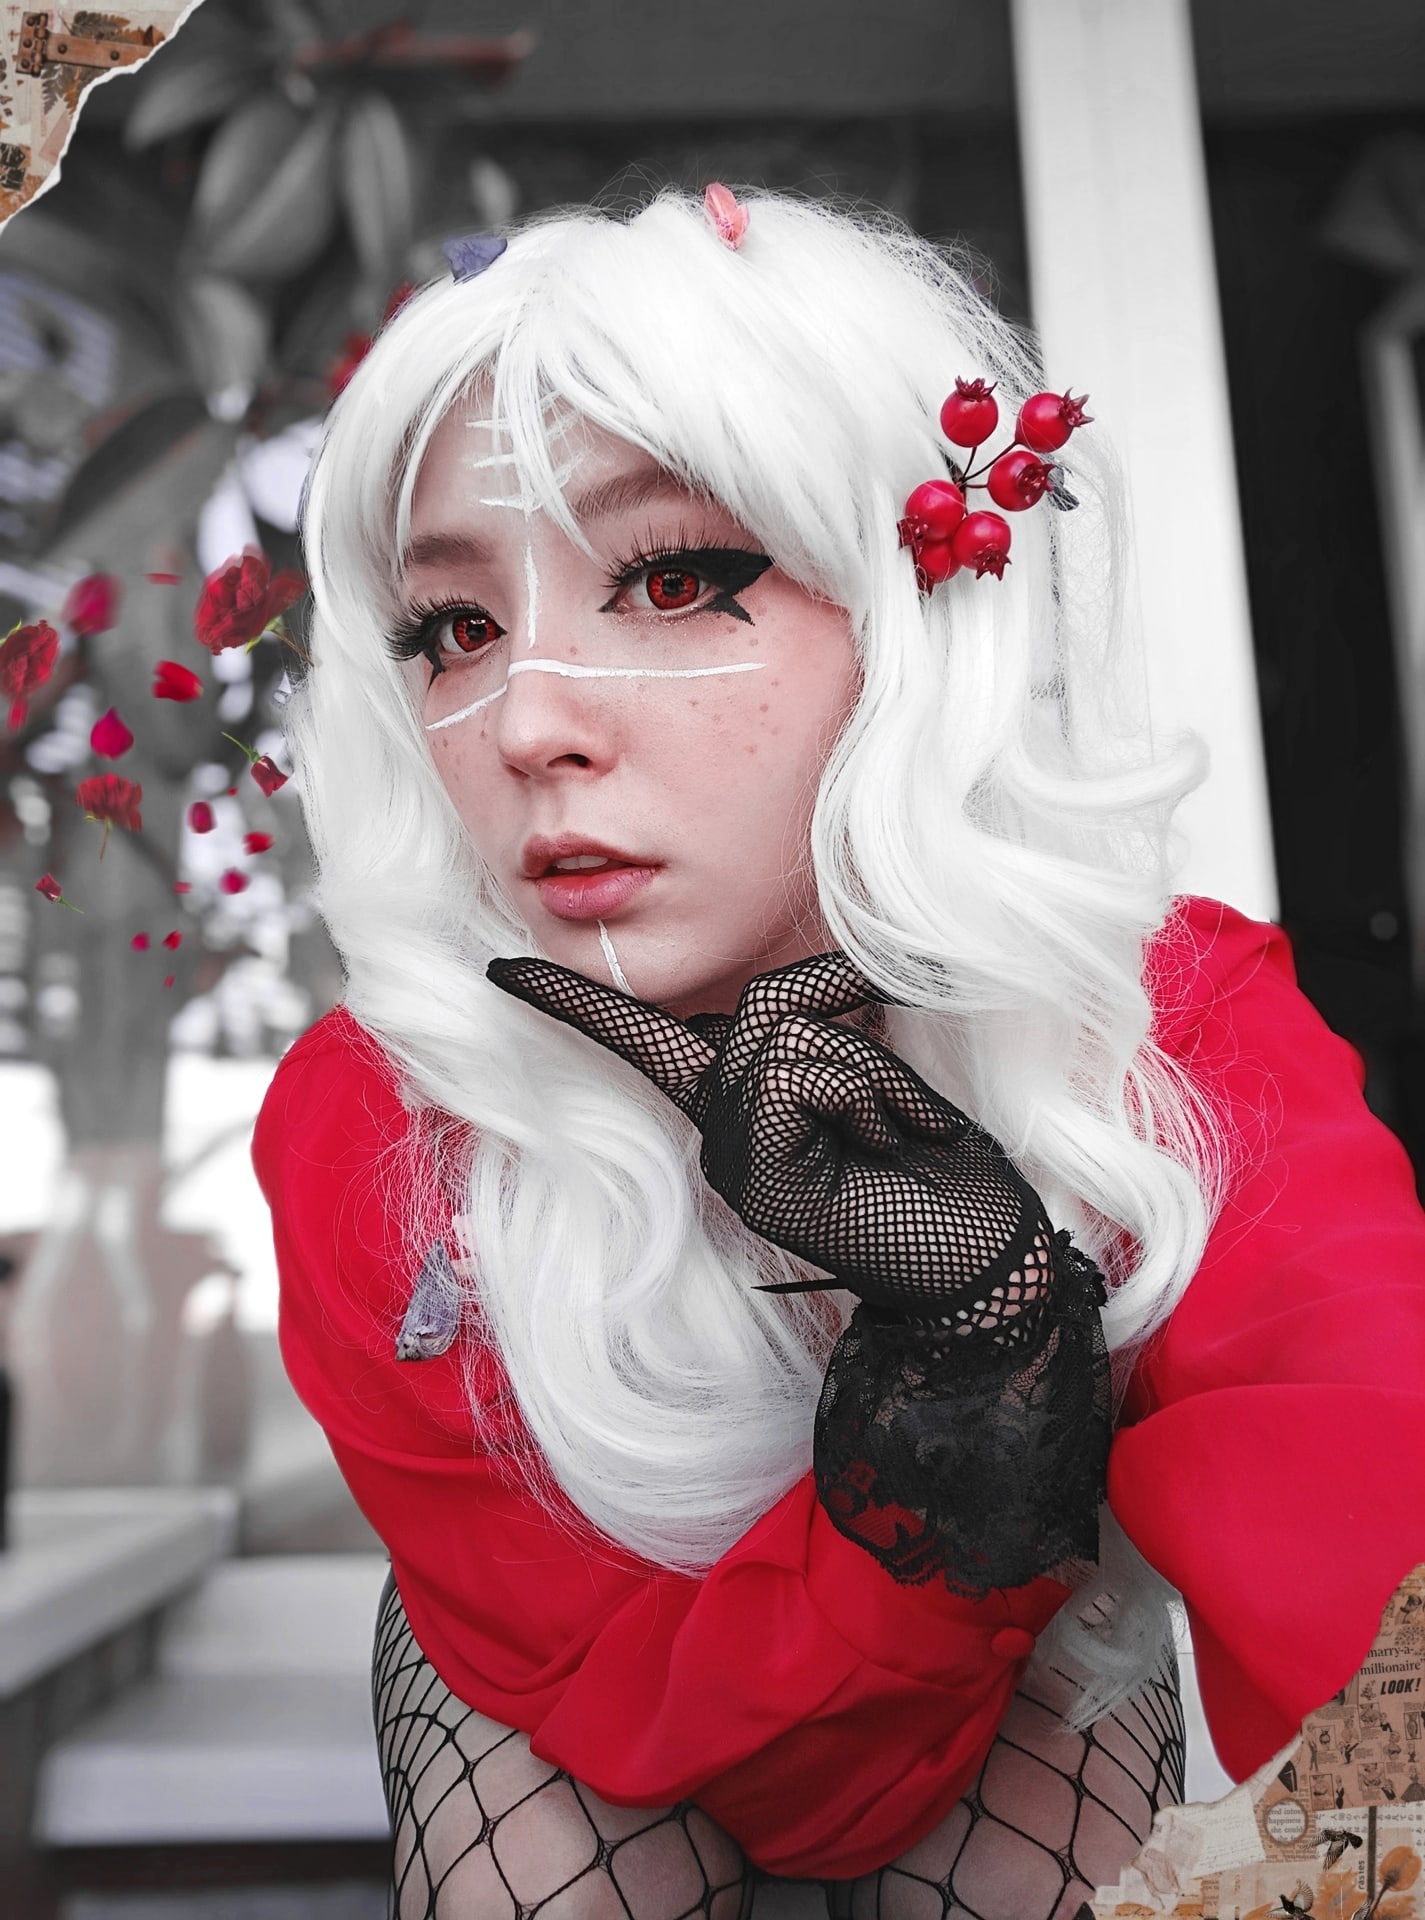 3 hours of makeup to wash off in 5 minutes - My, Cosplay, Craft, Games, Anime, PHOTOSESSION, Minecraft, League of legends, Makeup, Make-up artists, Wig, Costume, Makeup, Longpost